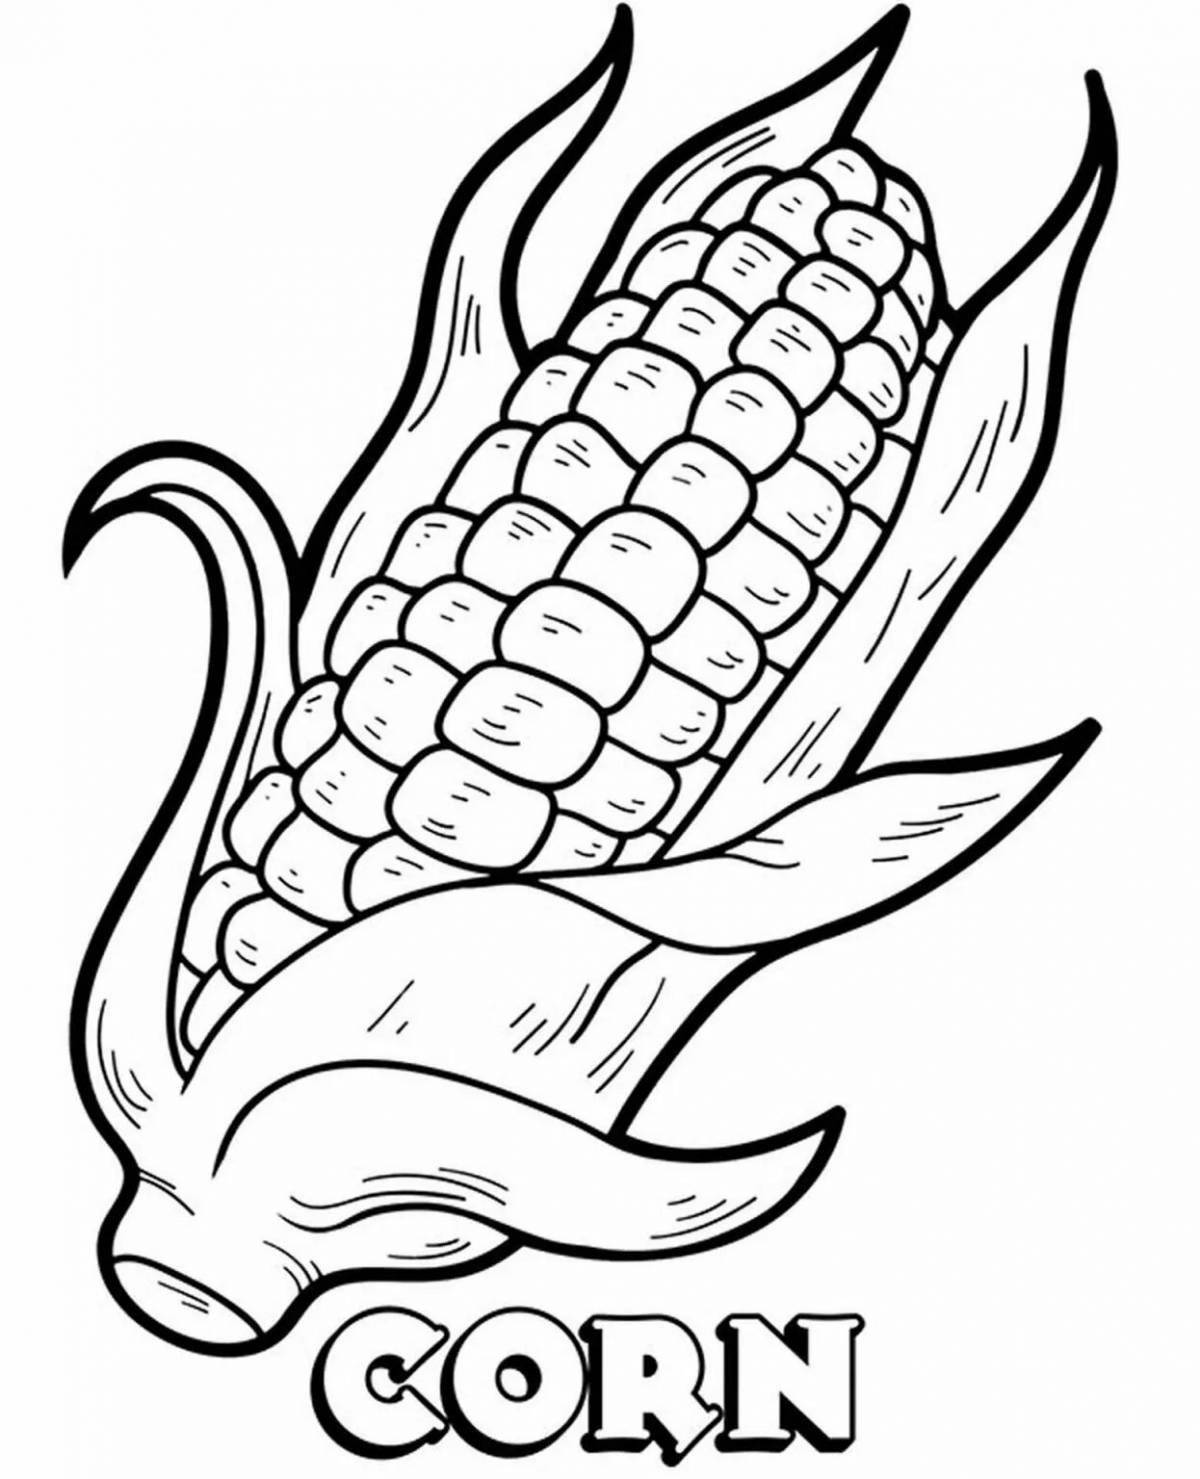 Great corn coloring page for kids